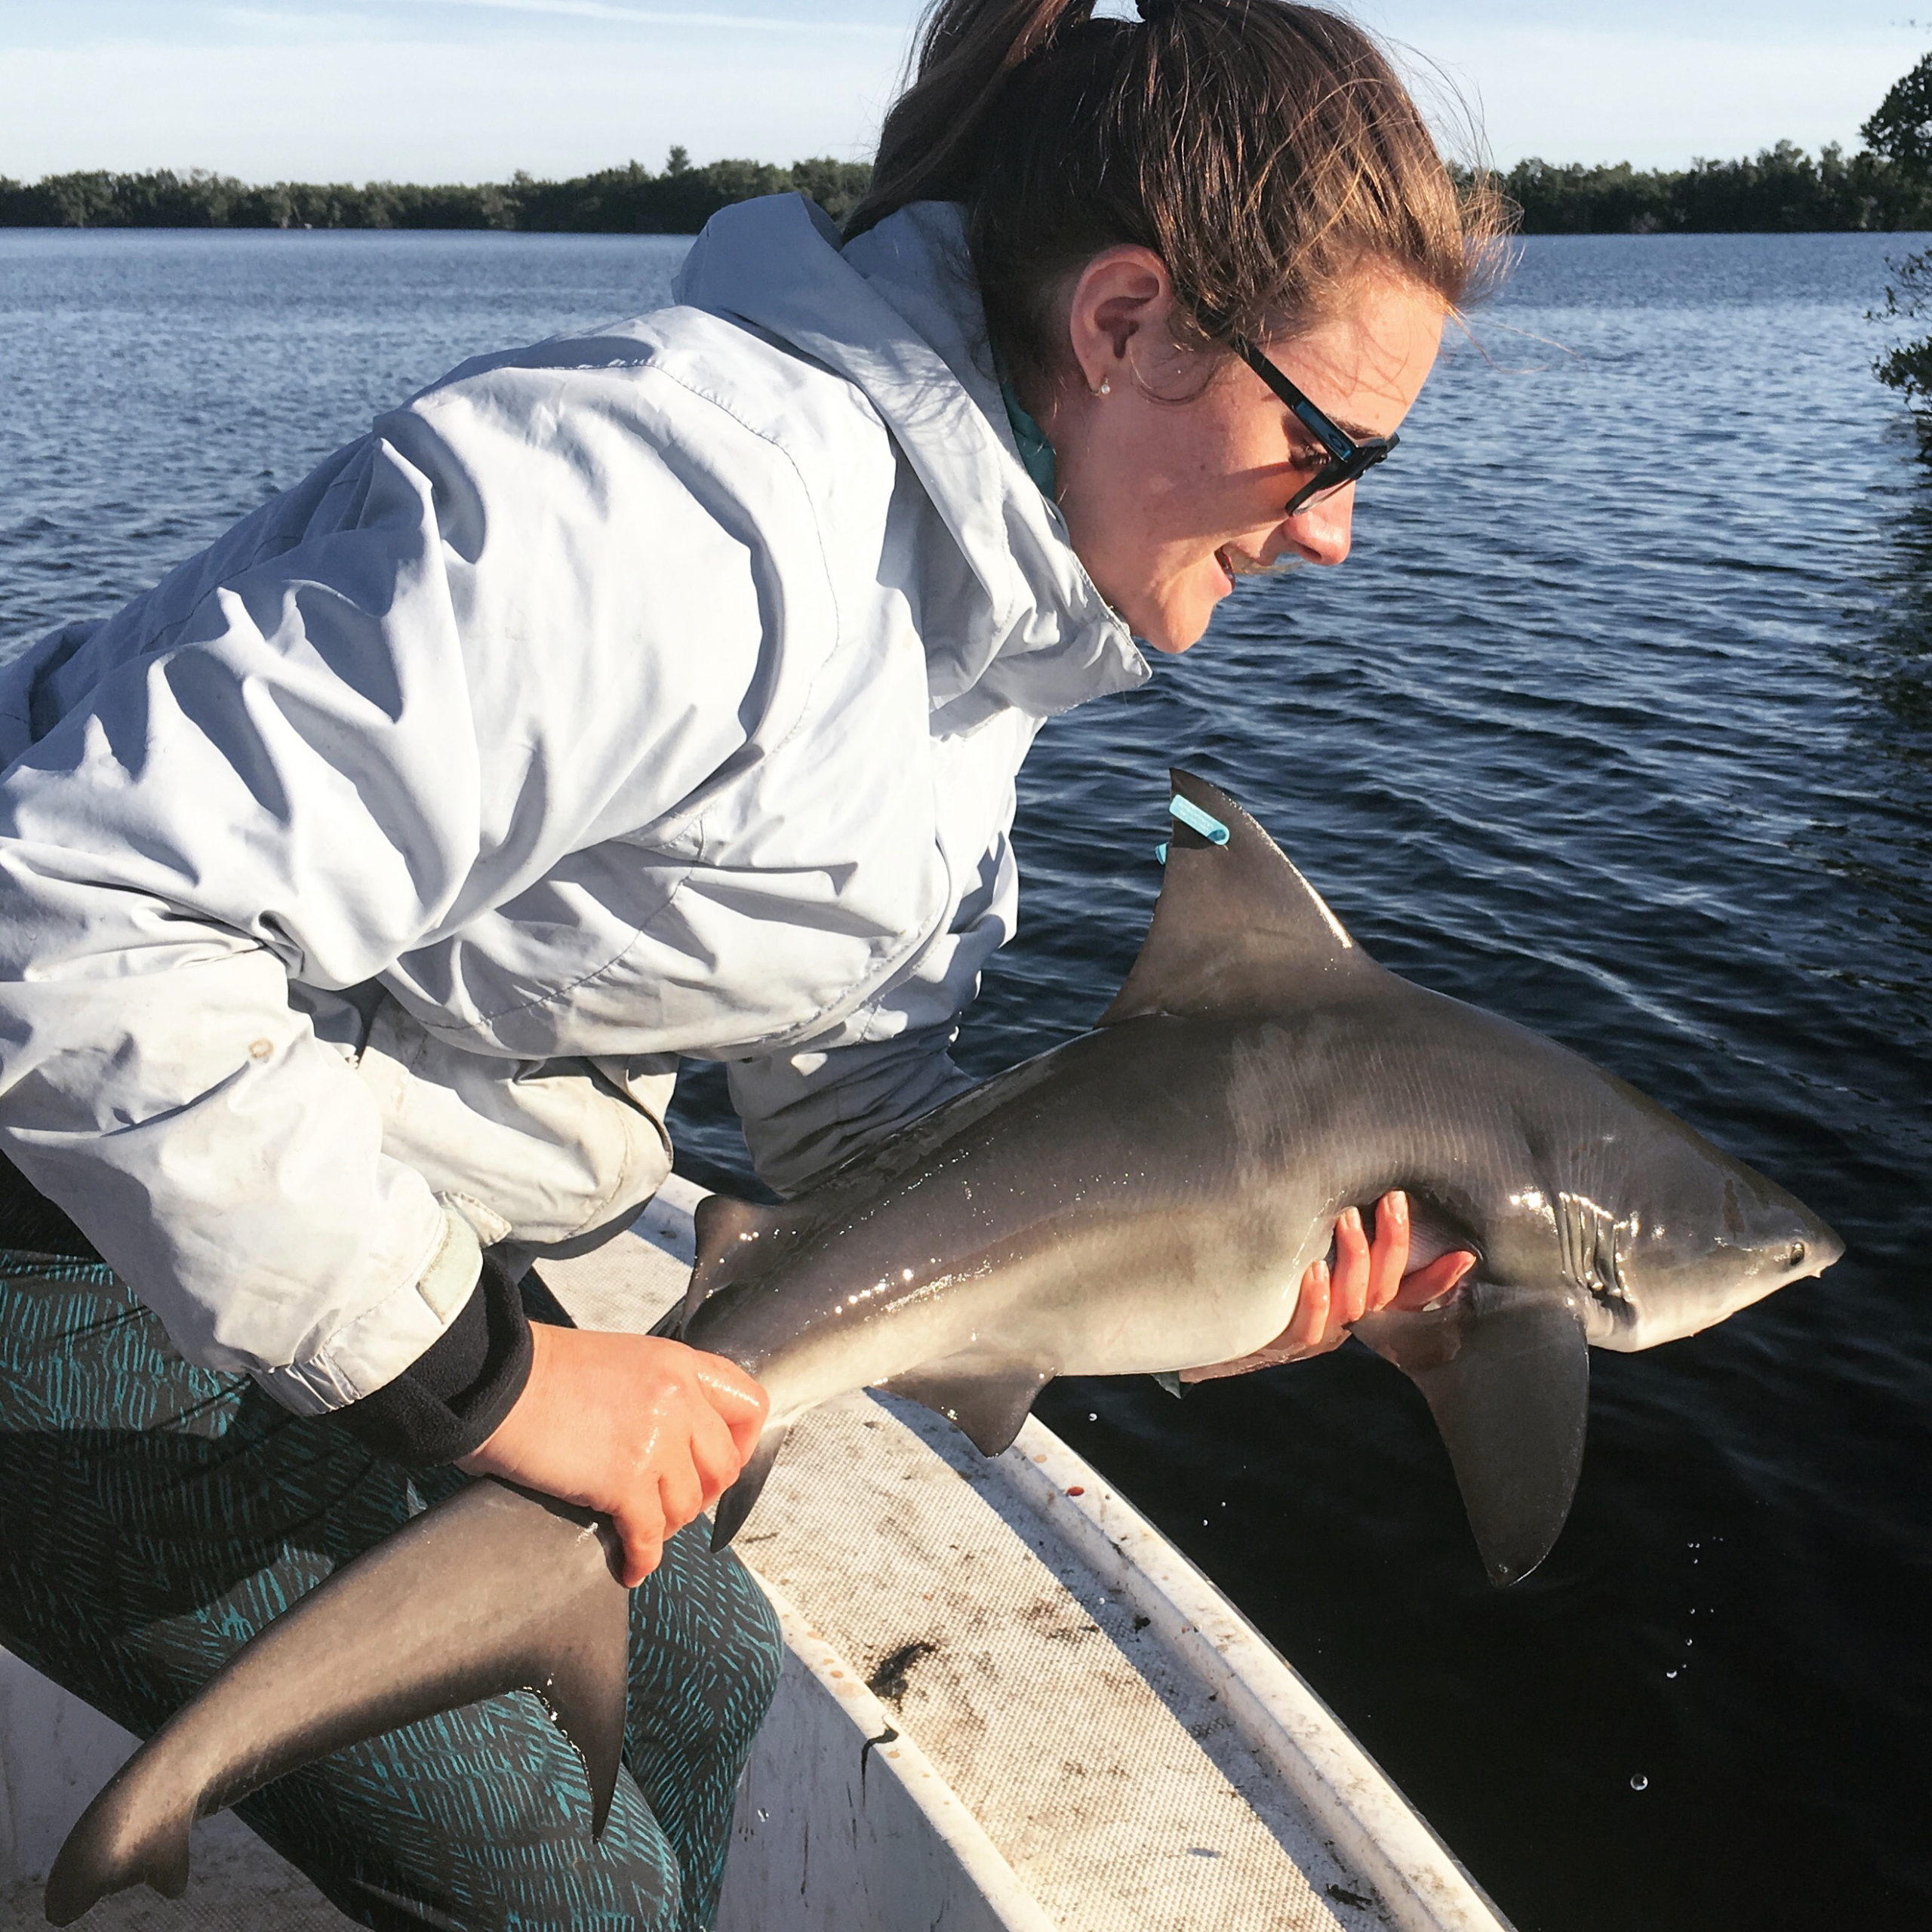 Releasing a tagged juvenile bull shark in the Everglades.